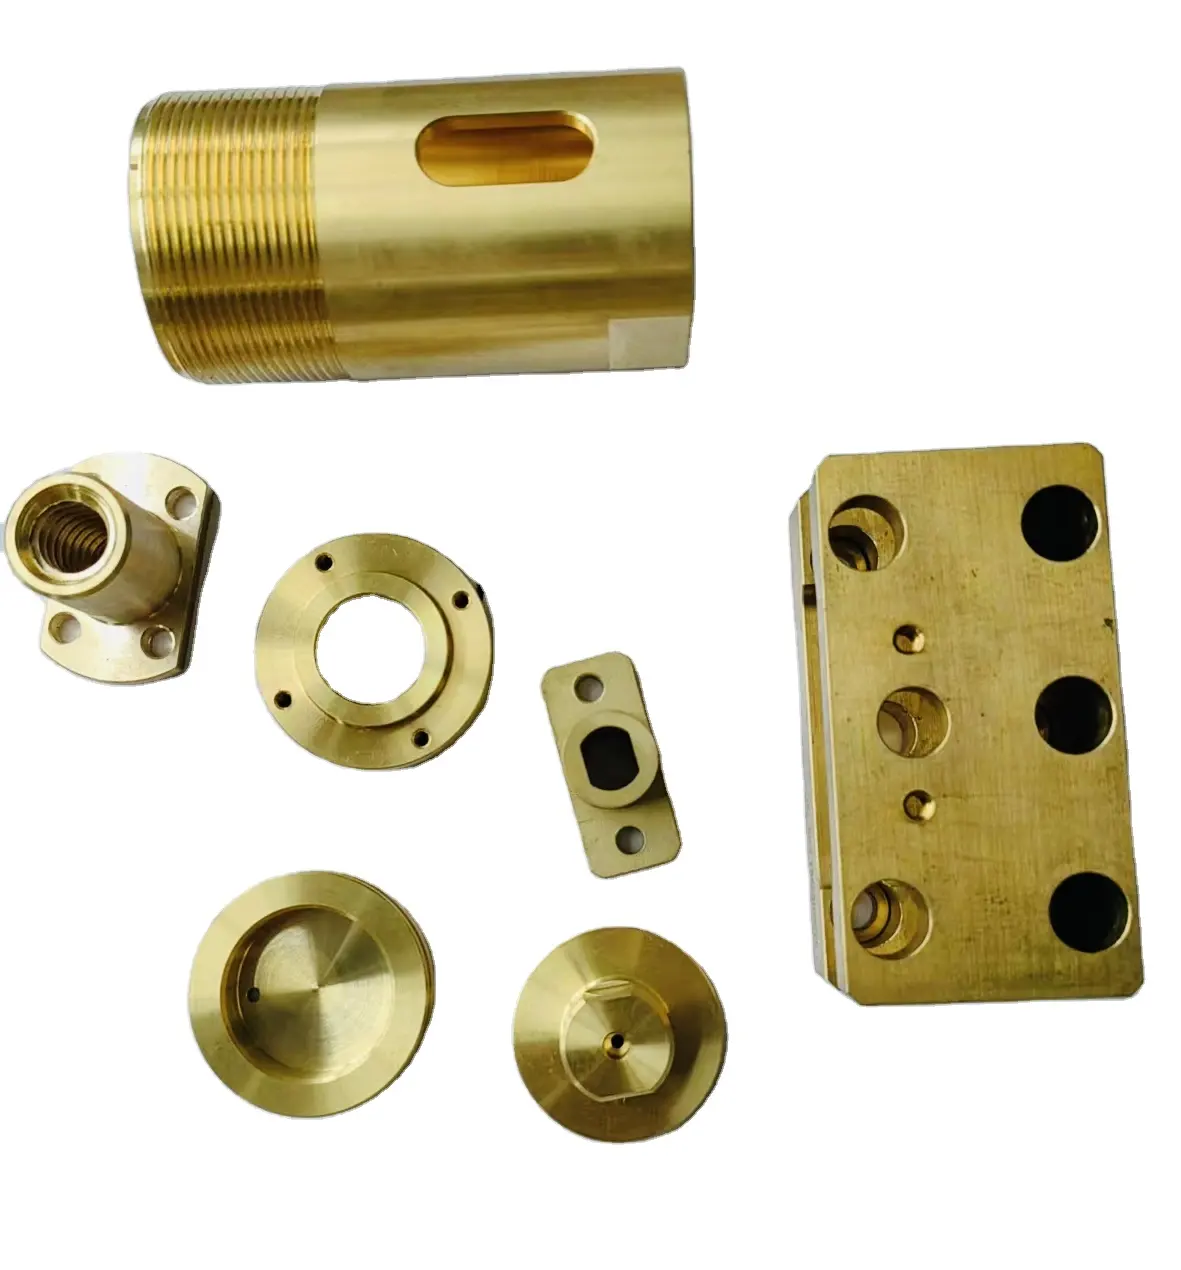 OEM supported hardened metals brass aluminum milling turning cnc machining parts for auto parts